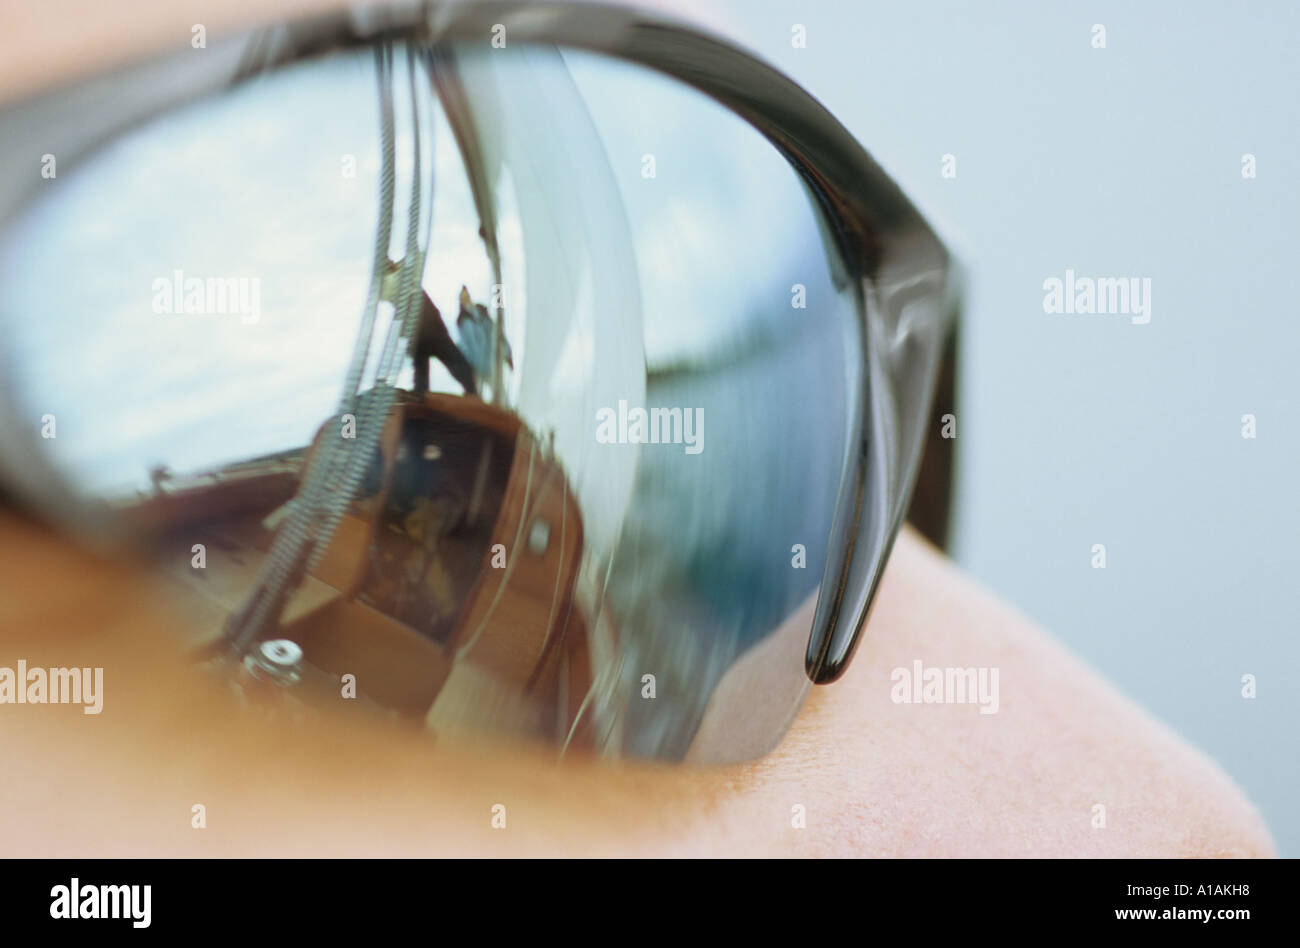 Close-up of sunglasses with reflection of boat Stock Photo